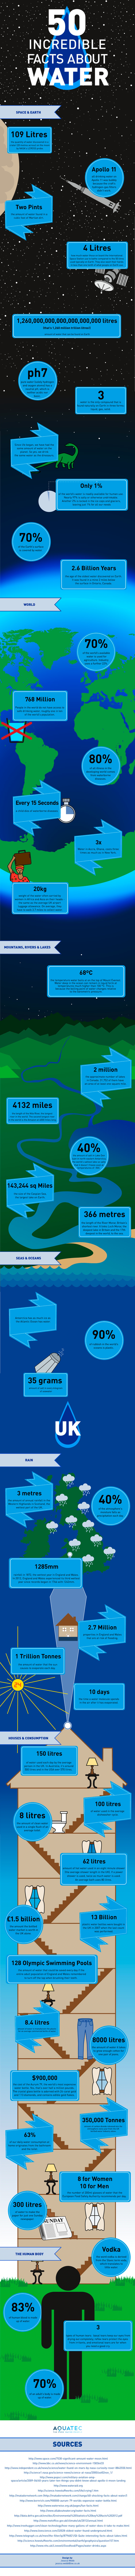 50 Incredible Facts About Water Infographic